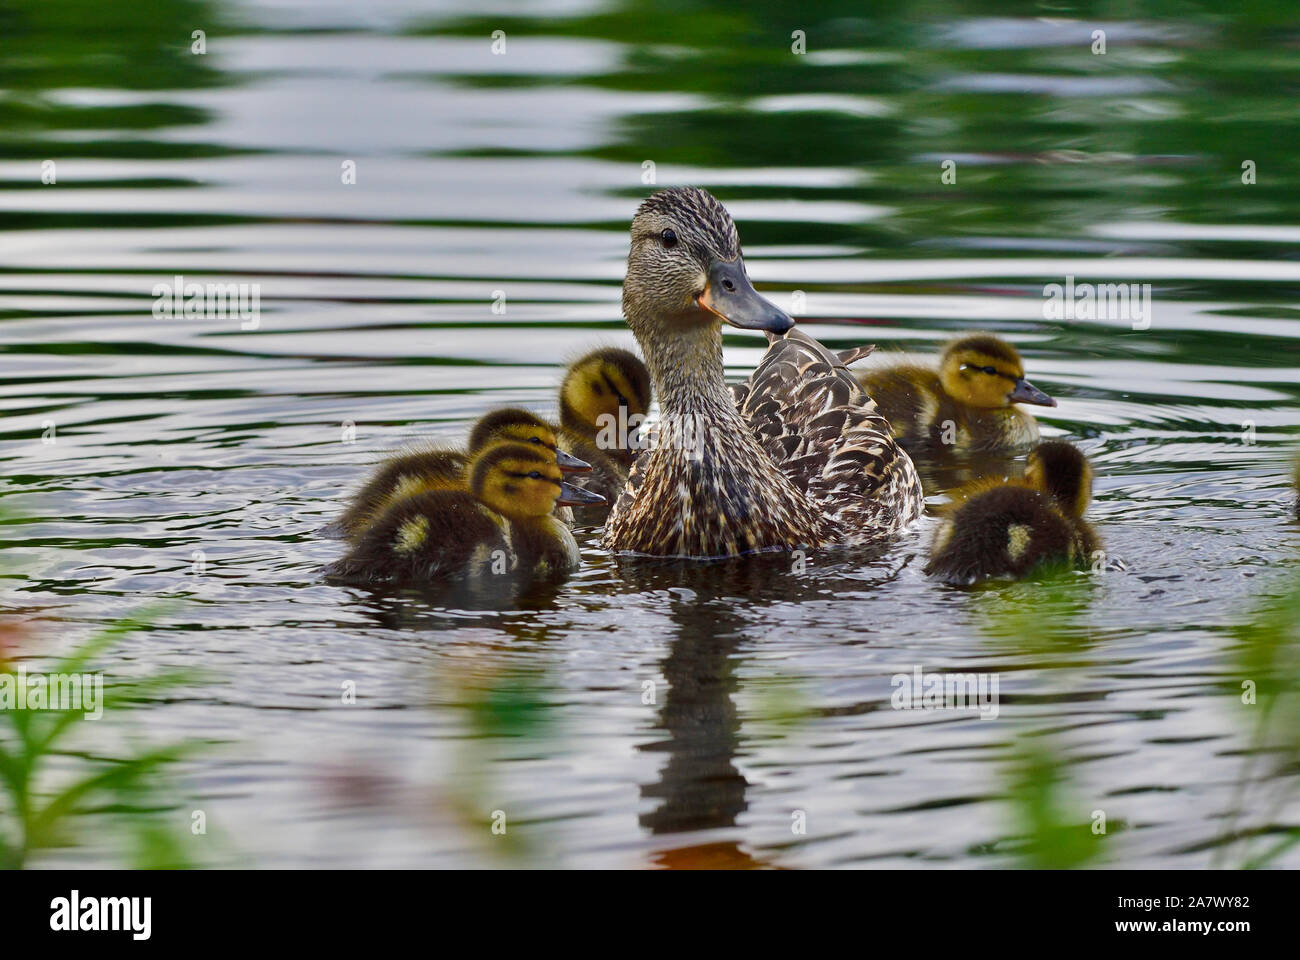 A mother mallard duck Anas platyrhynchos, with her young chicks swimming in calm water of Maxwell lake near Hinton Alberta Canada. Stock Photo